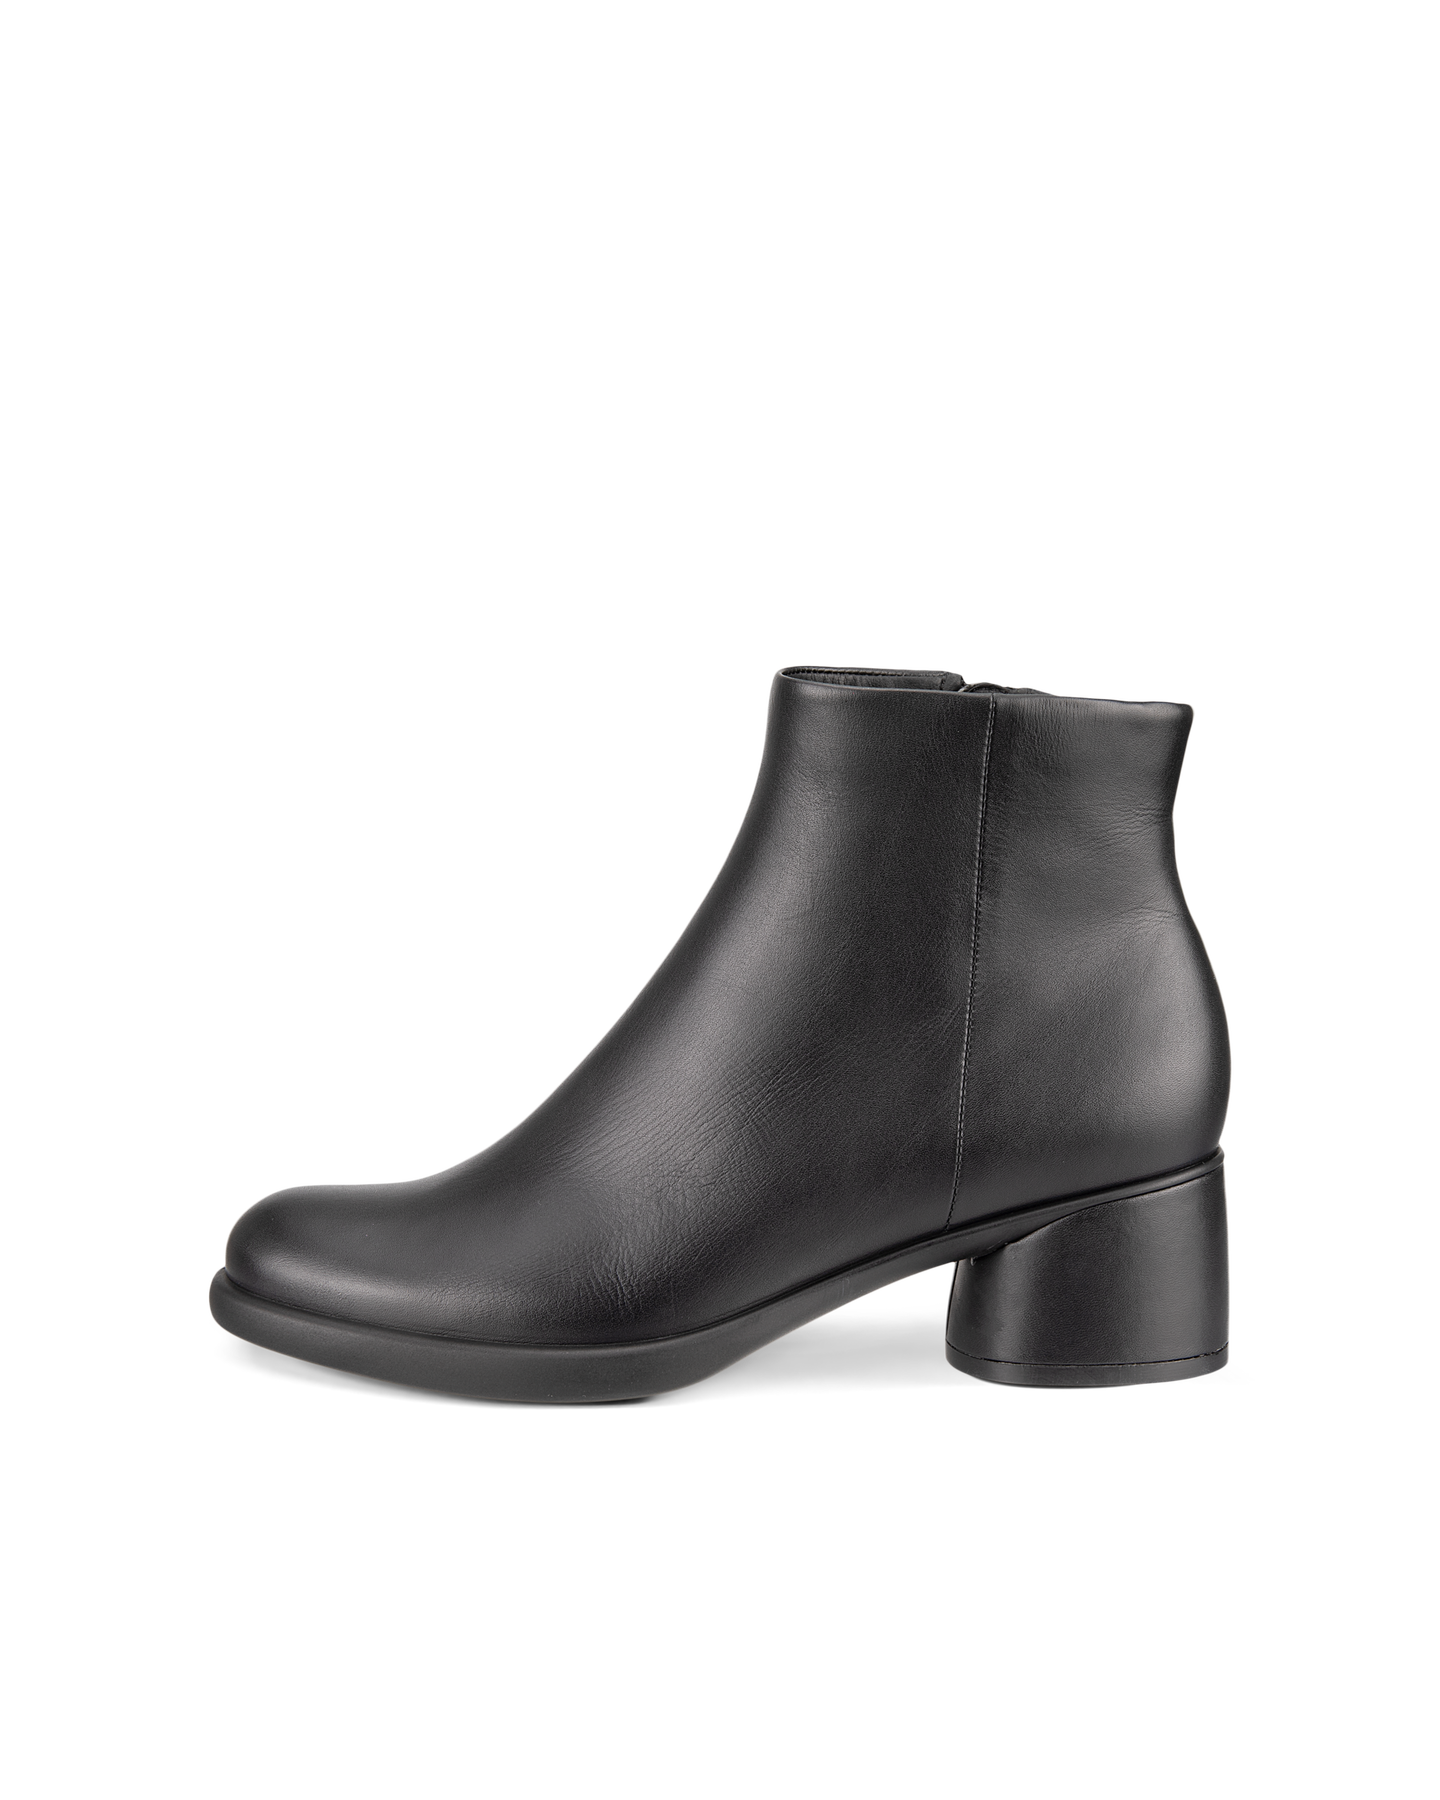 UPC 194891337434 product image for ECCO Women's Sculpted Lx 35 Ankle Boot Size 5 Leather Black | upcitemdb.com